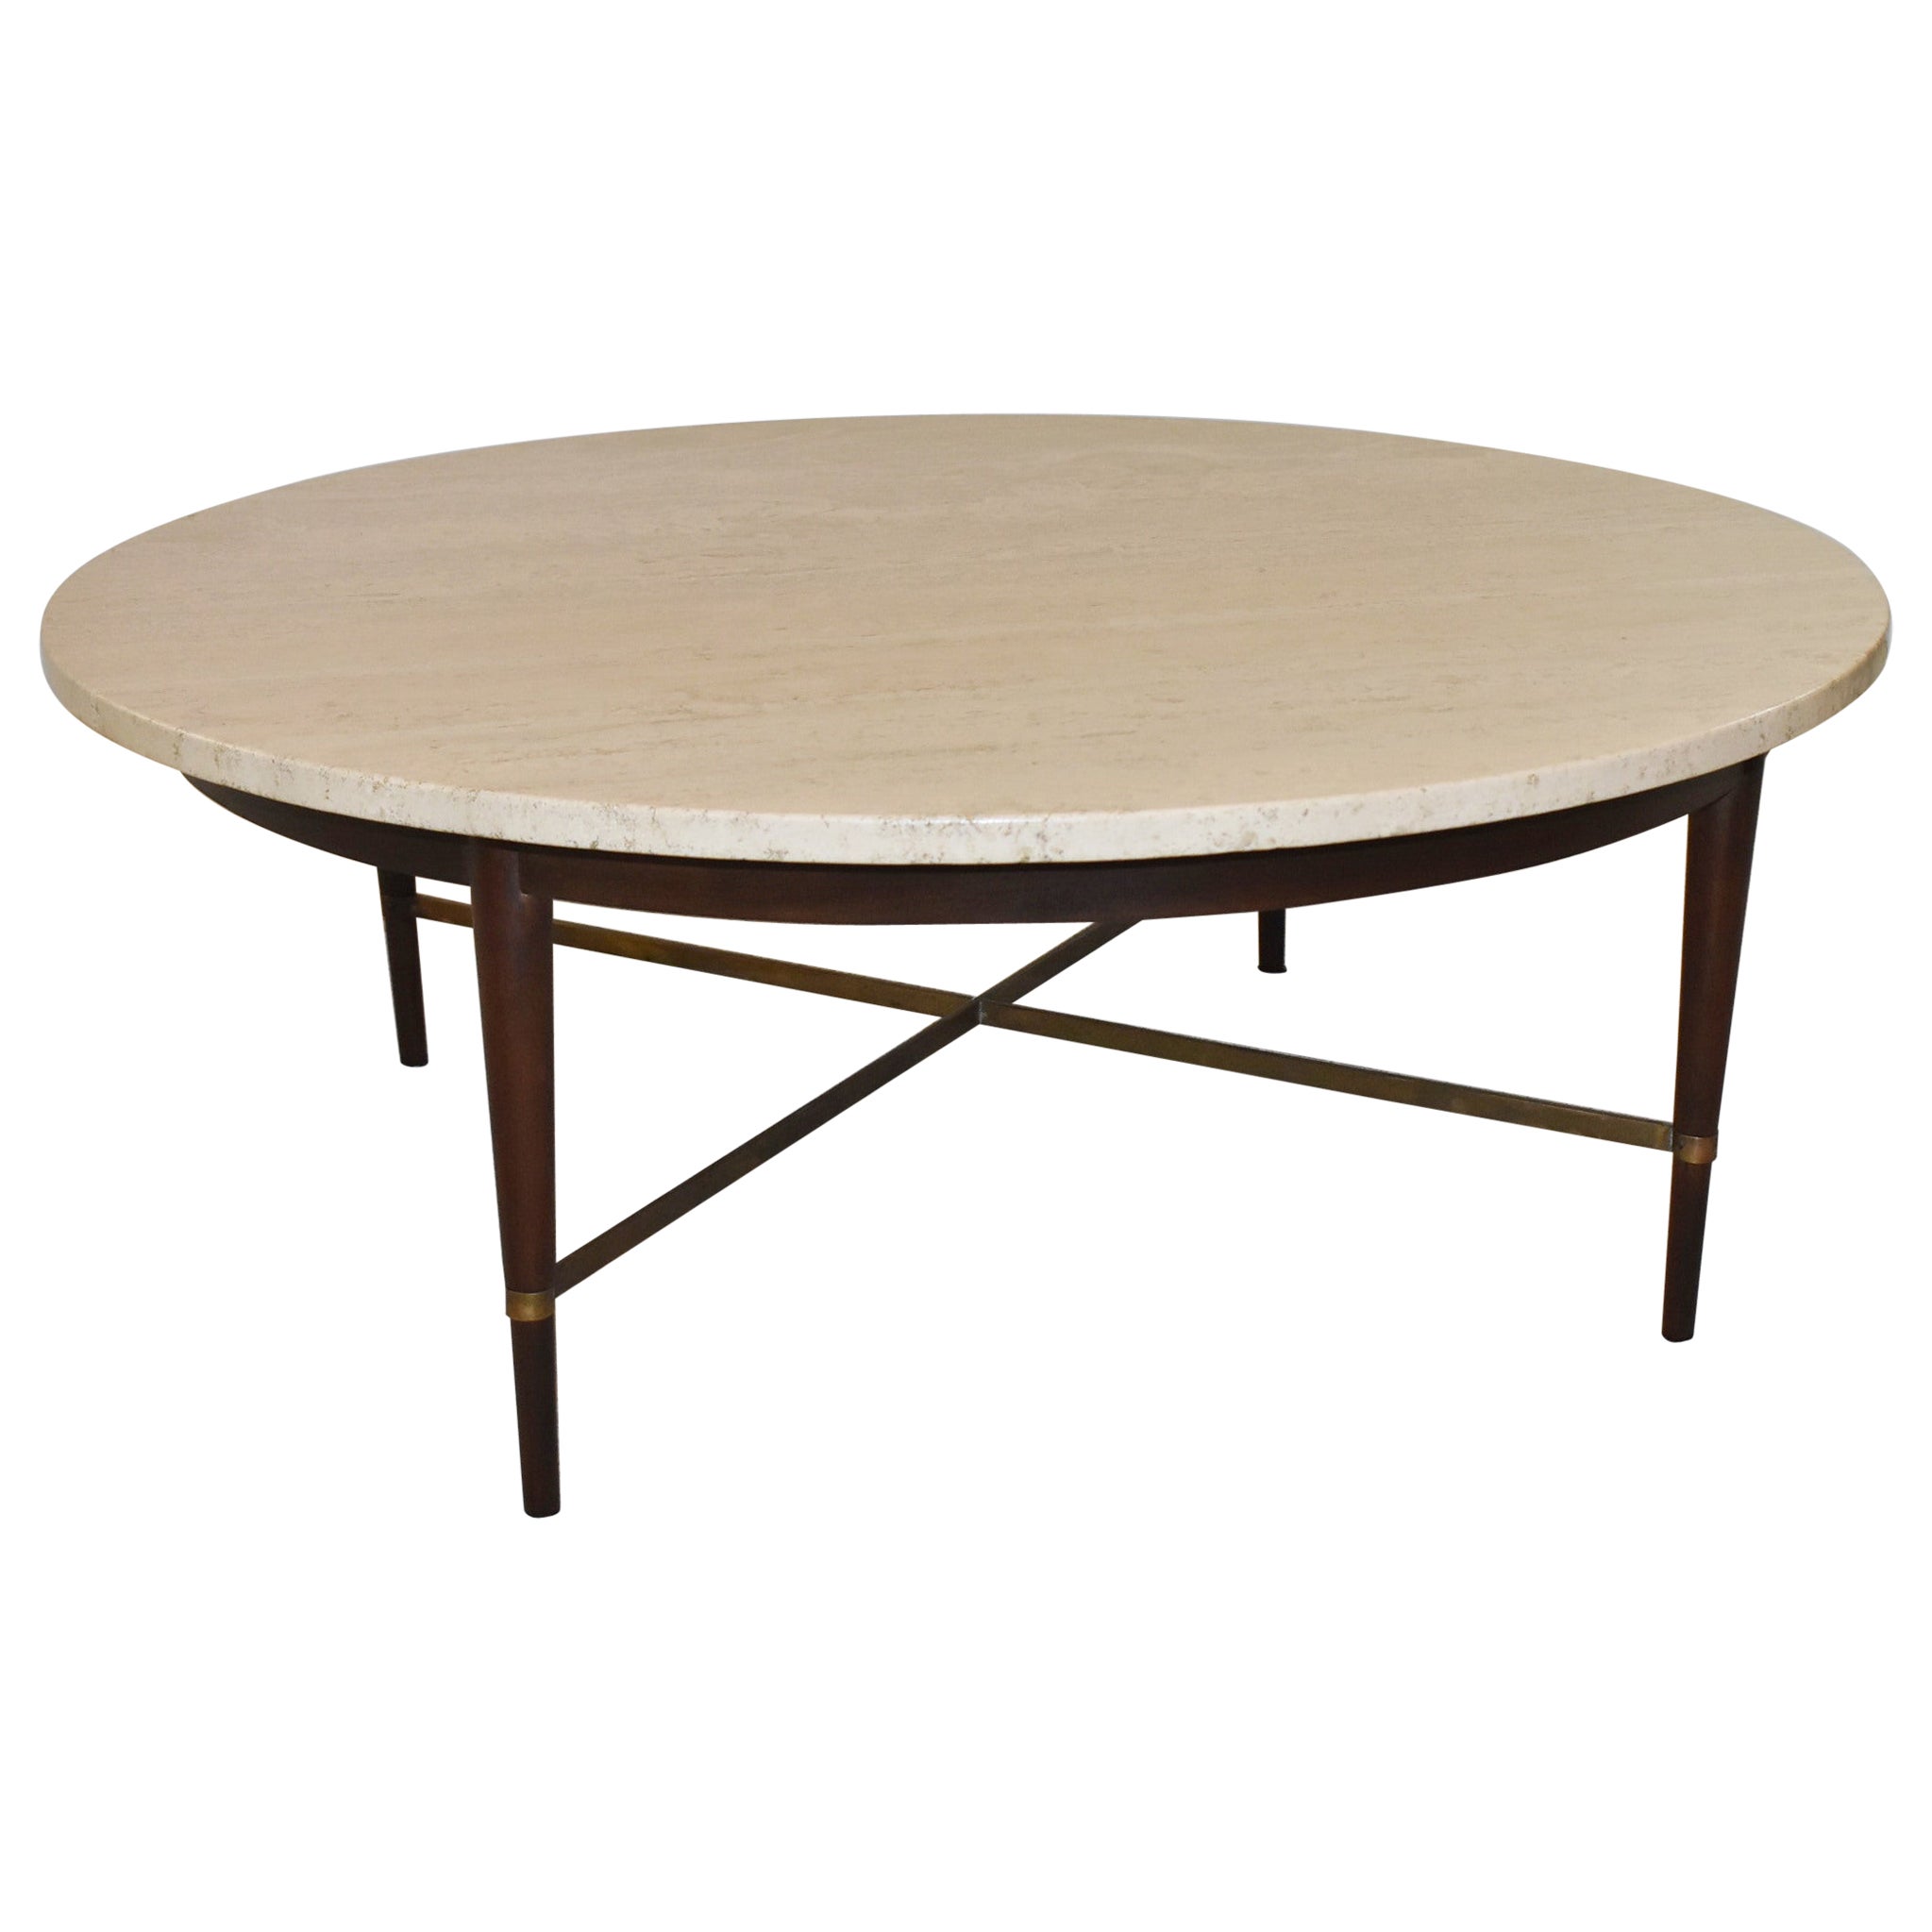 Paul McCobb Travertine Top Coffee Table, Connoisseur Collection